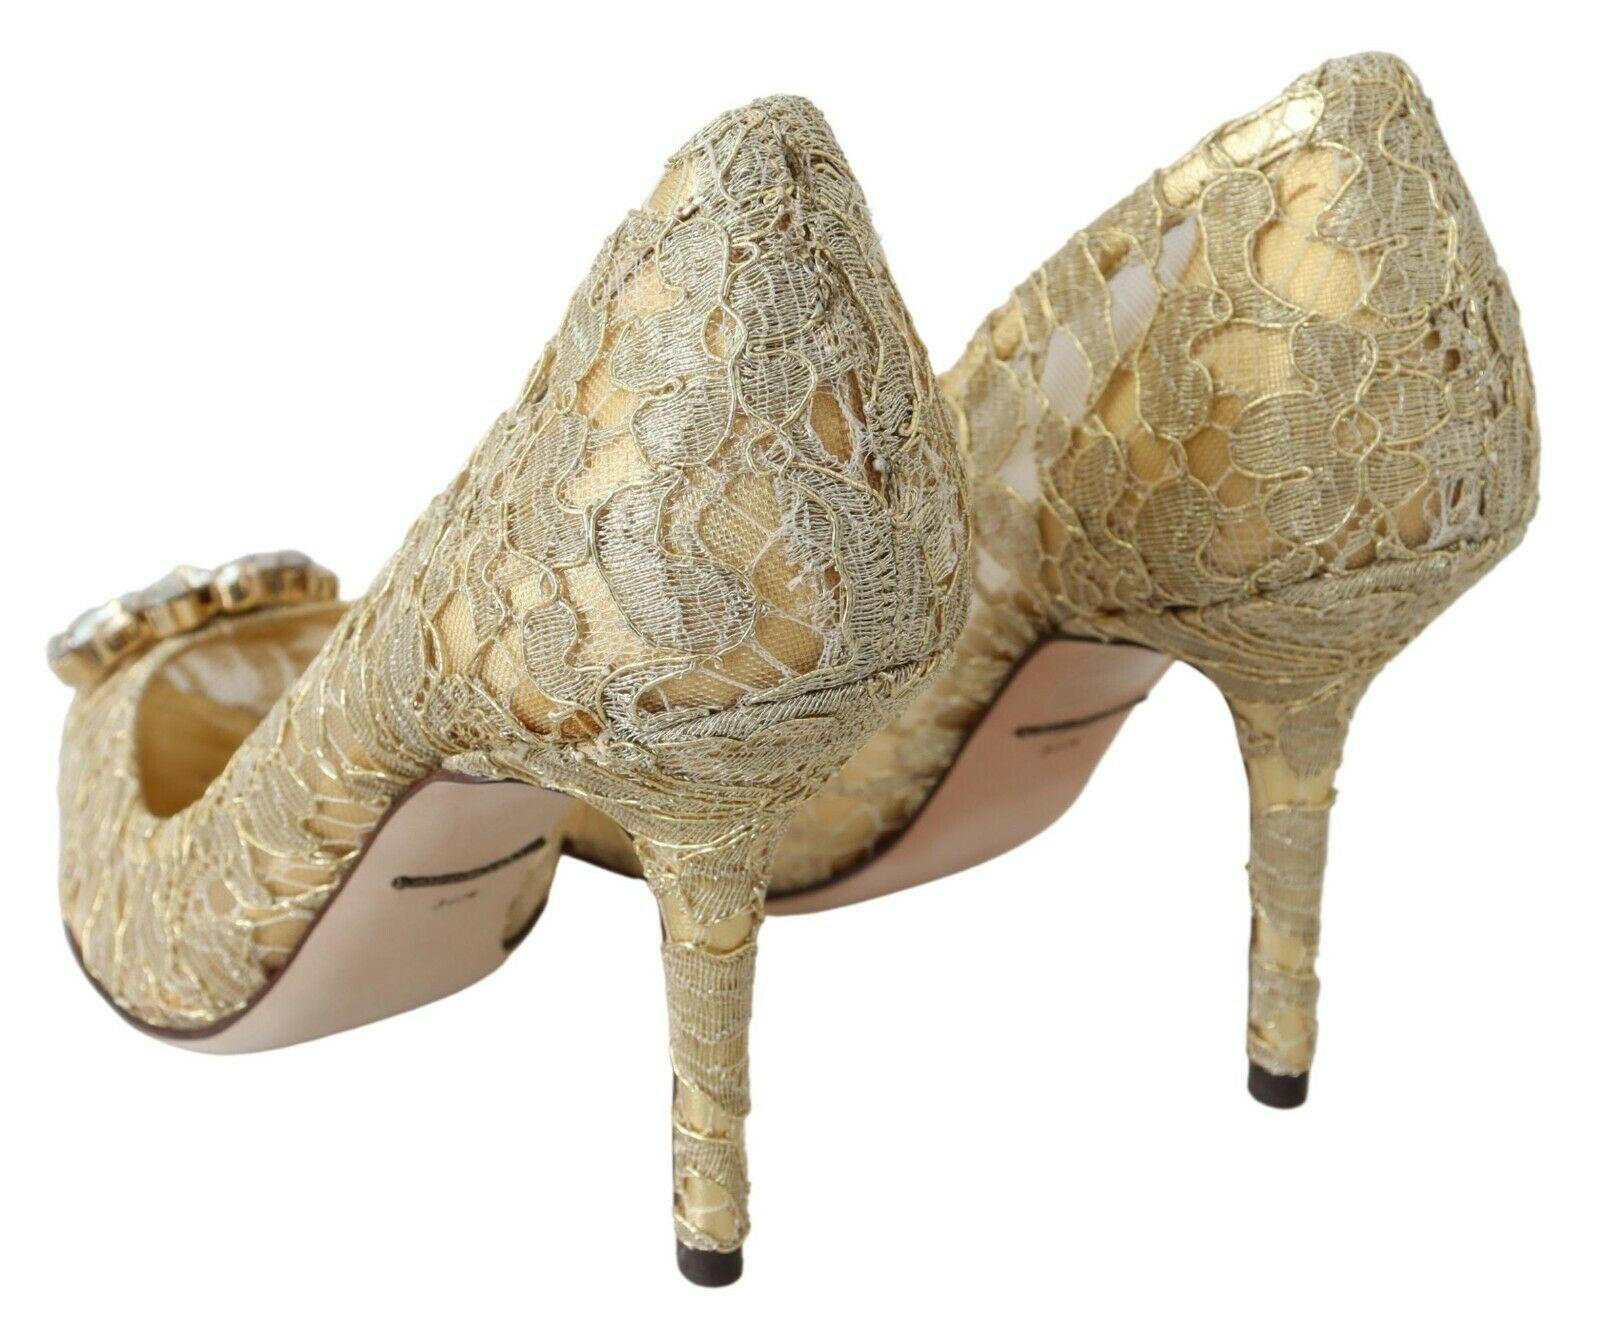 Dolce & Gabbana Gold Floral Lace Pumps Shoes High Heels With Jewels Crystals DG 1